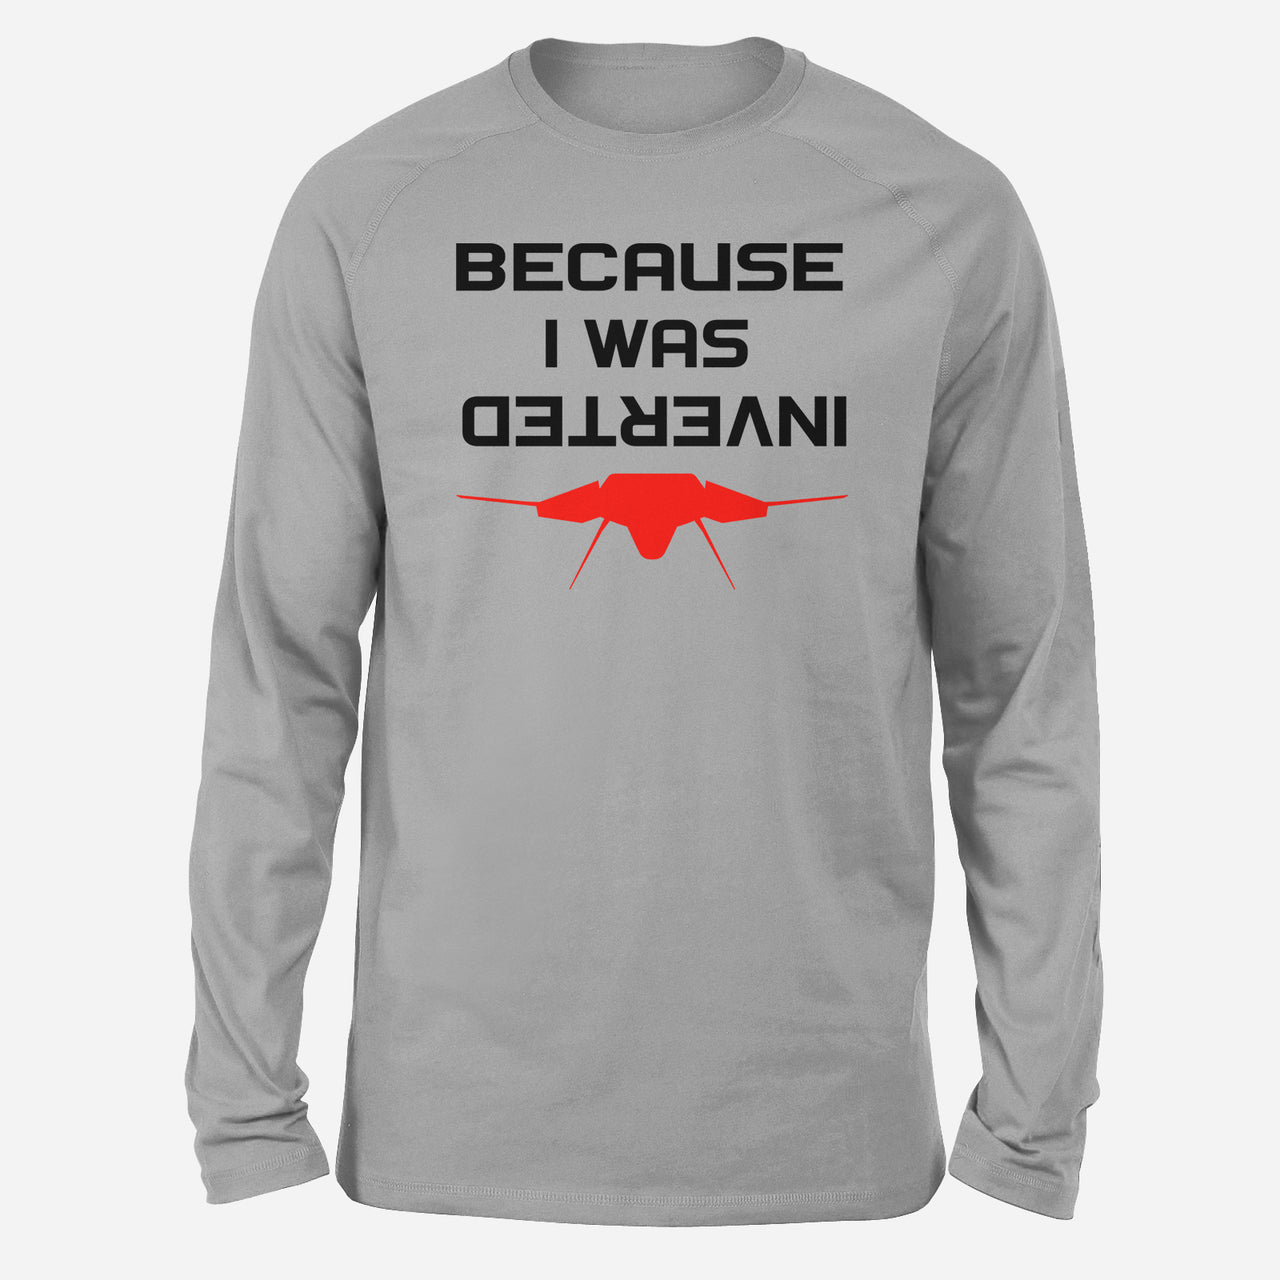 Because I was Inverted Designed Long-Sleeve T-Shirts